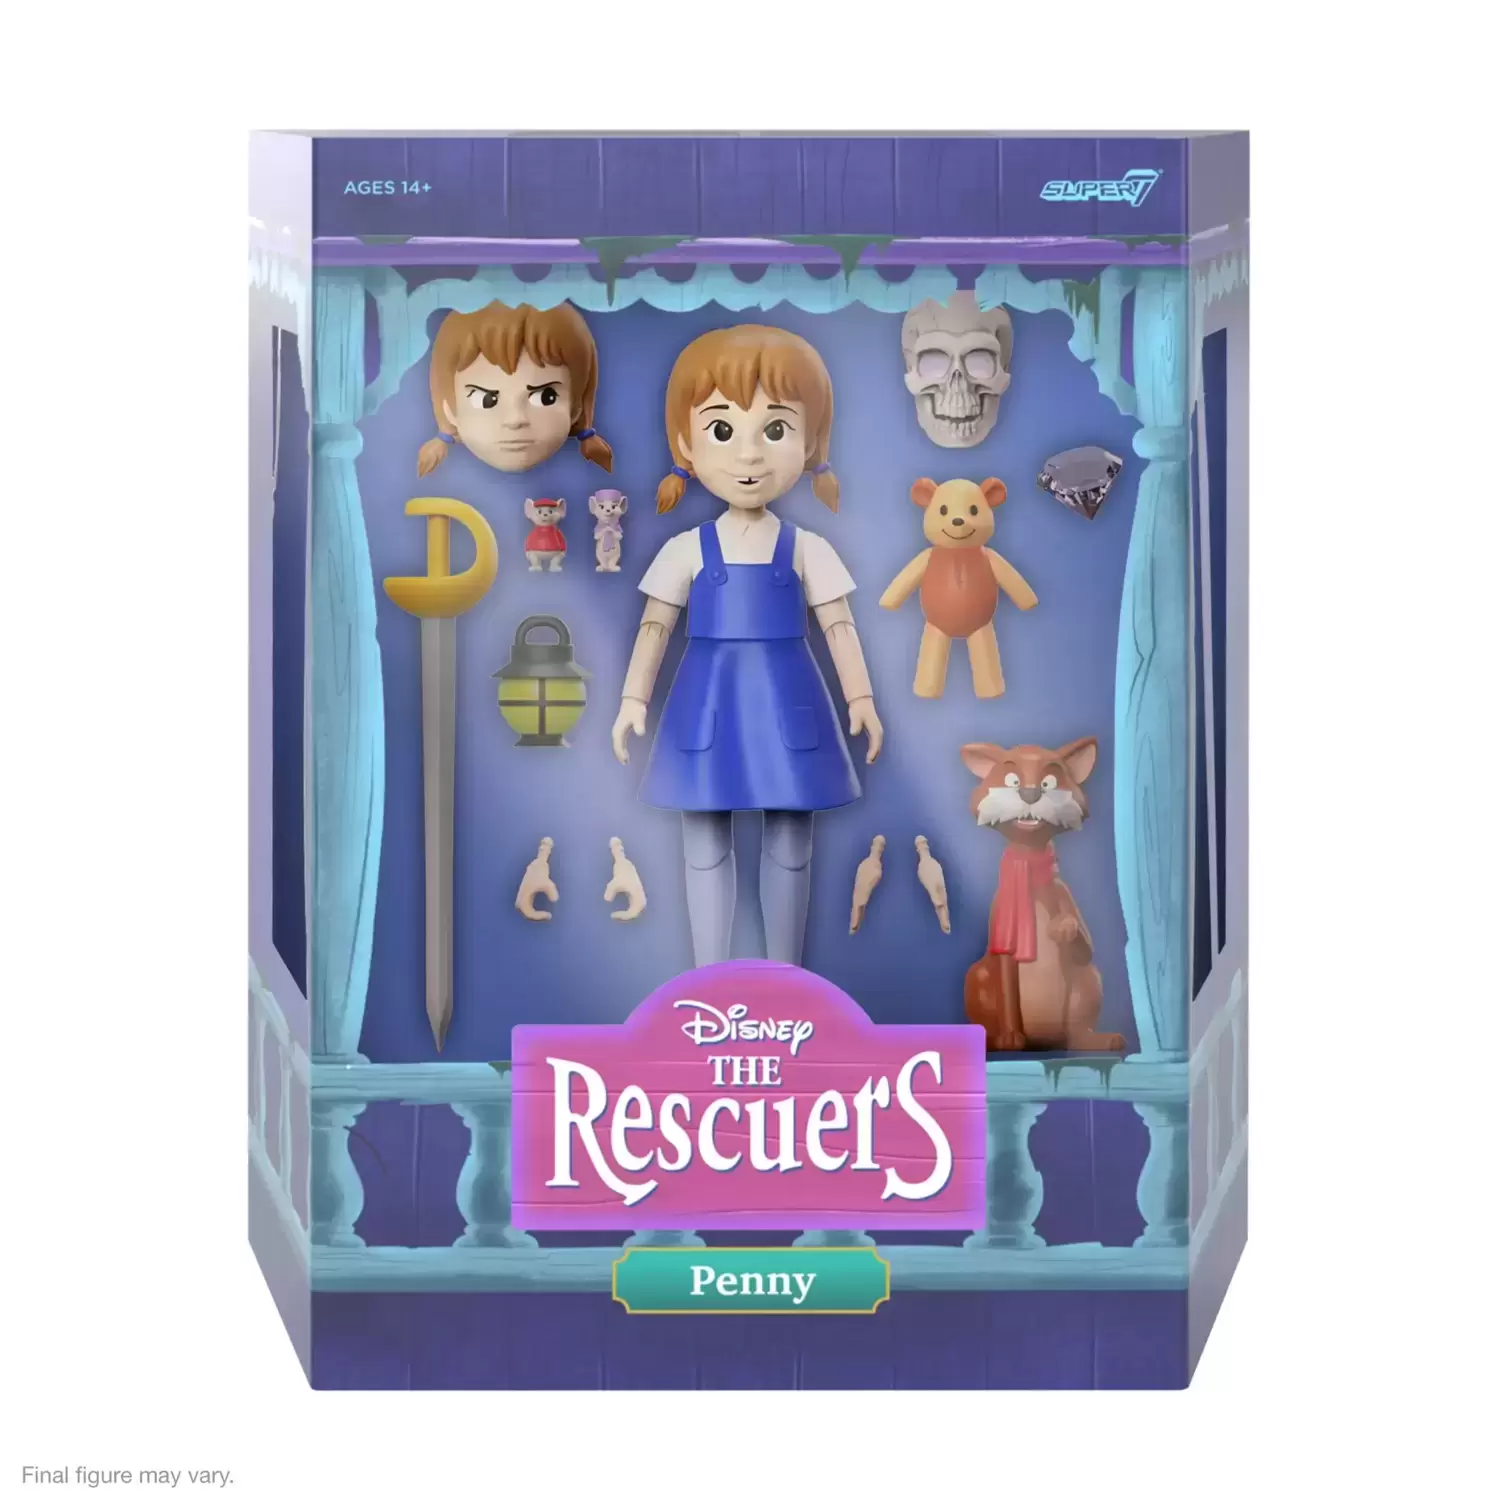 Super7 - ULTIMATES! - The Rescuers - Penny